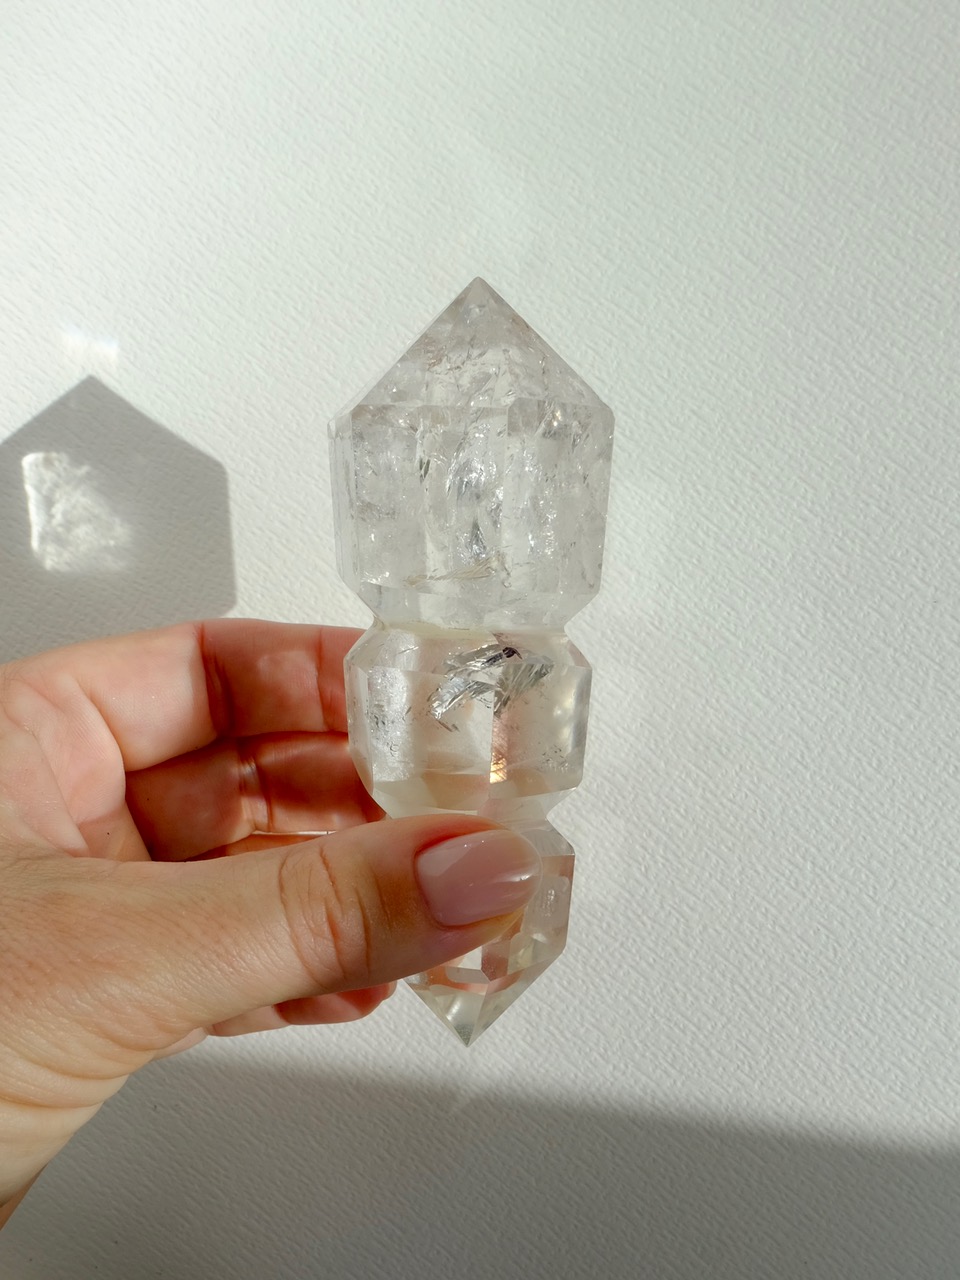 Starroot Scepter hand-carved from Royal Quartz